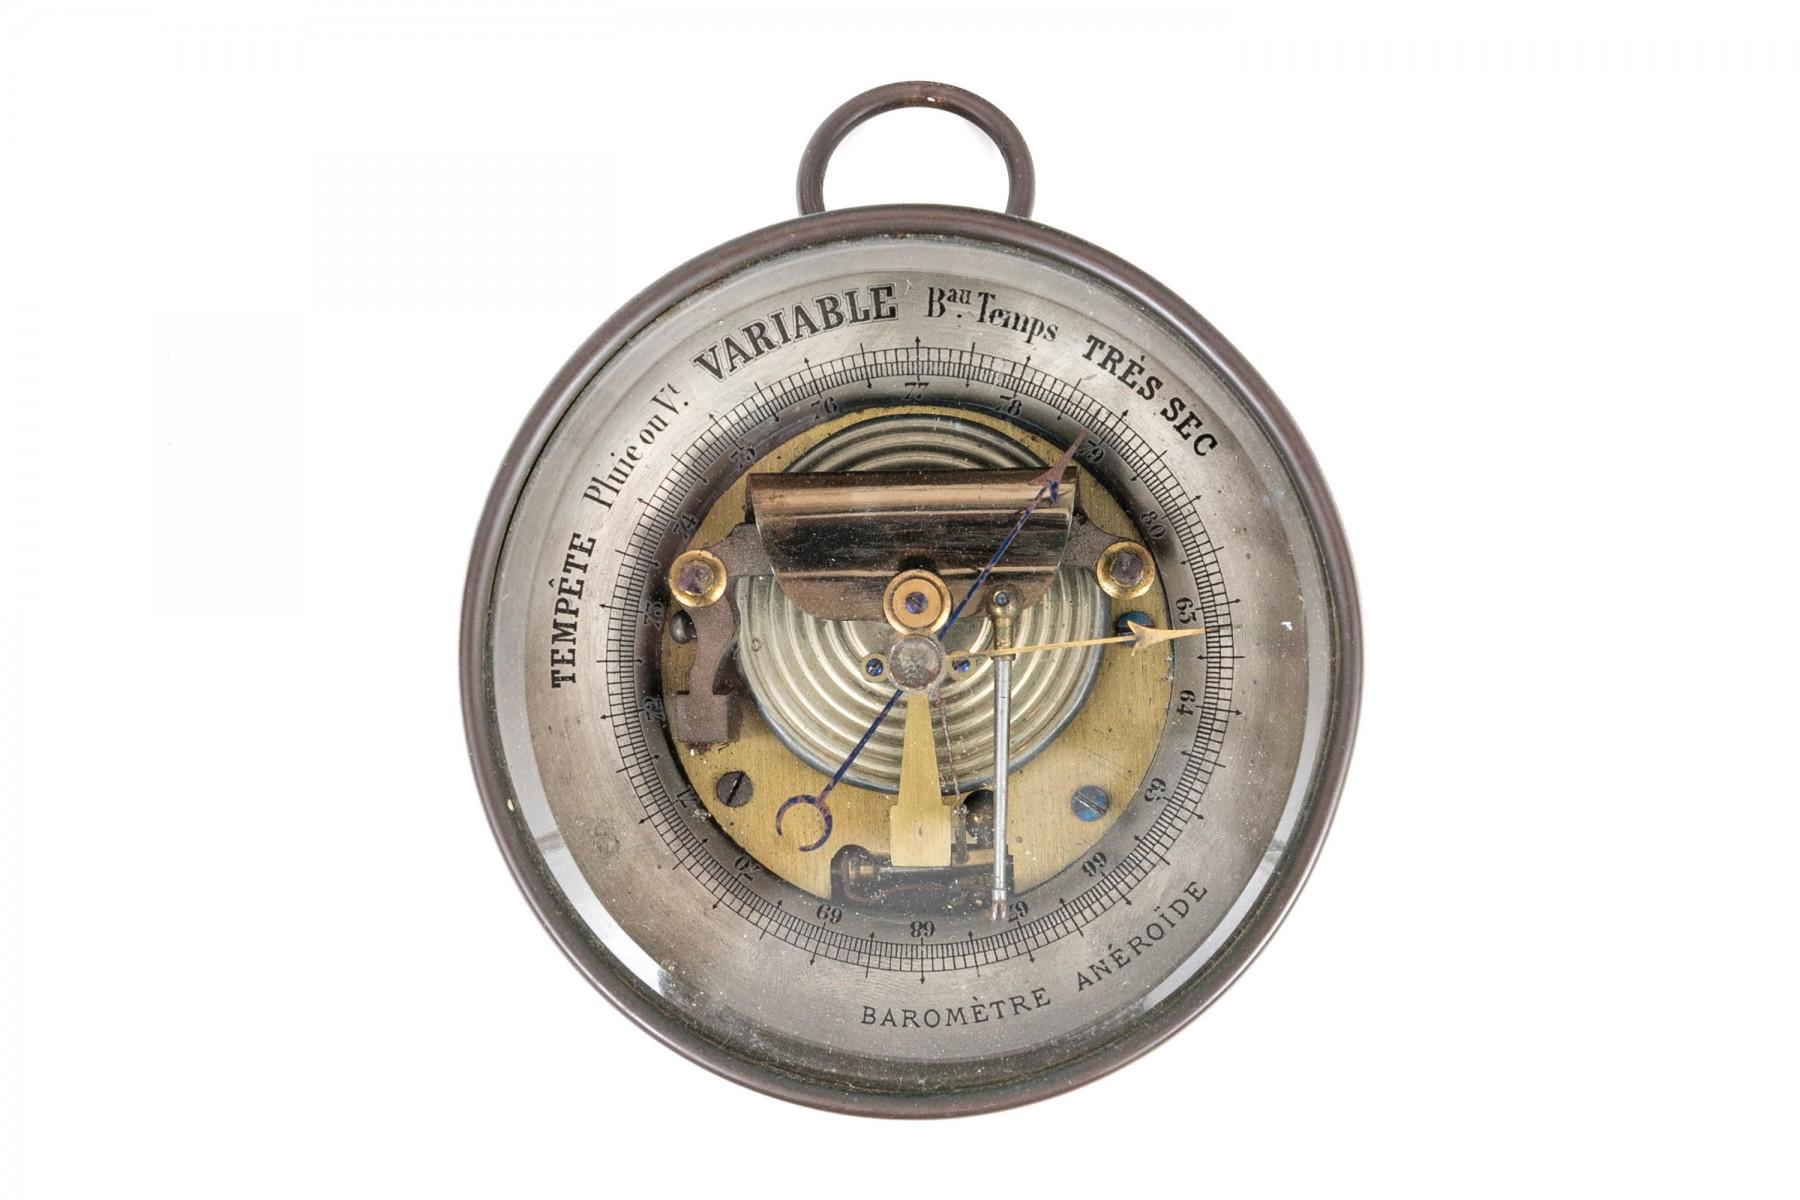 Nice French aneroid barometer in a brass circular case and equipped with a brass handle. A aneroid barometer is a device for measuring atmospheric pressure without the use of fluids. It consists of a partially evacuated metal chamber, the thin